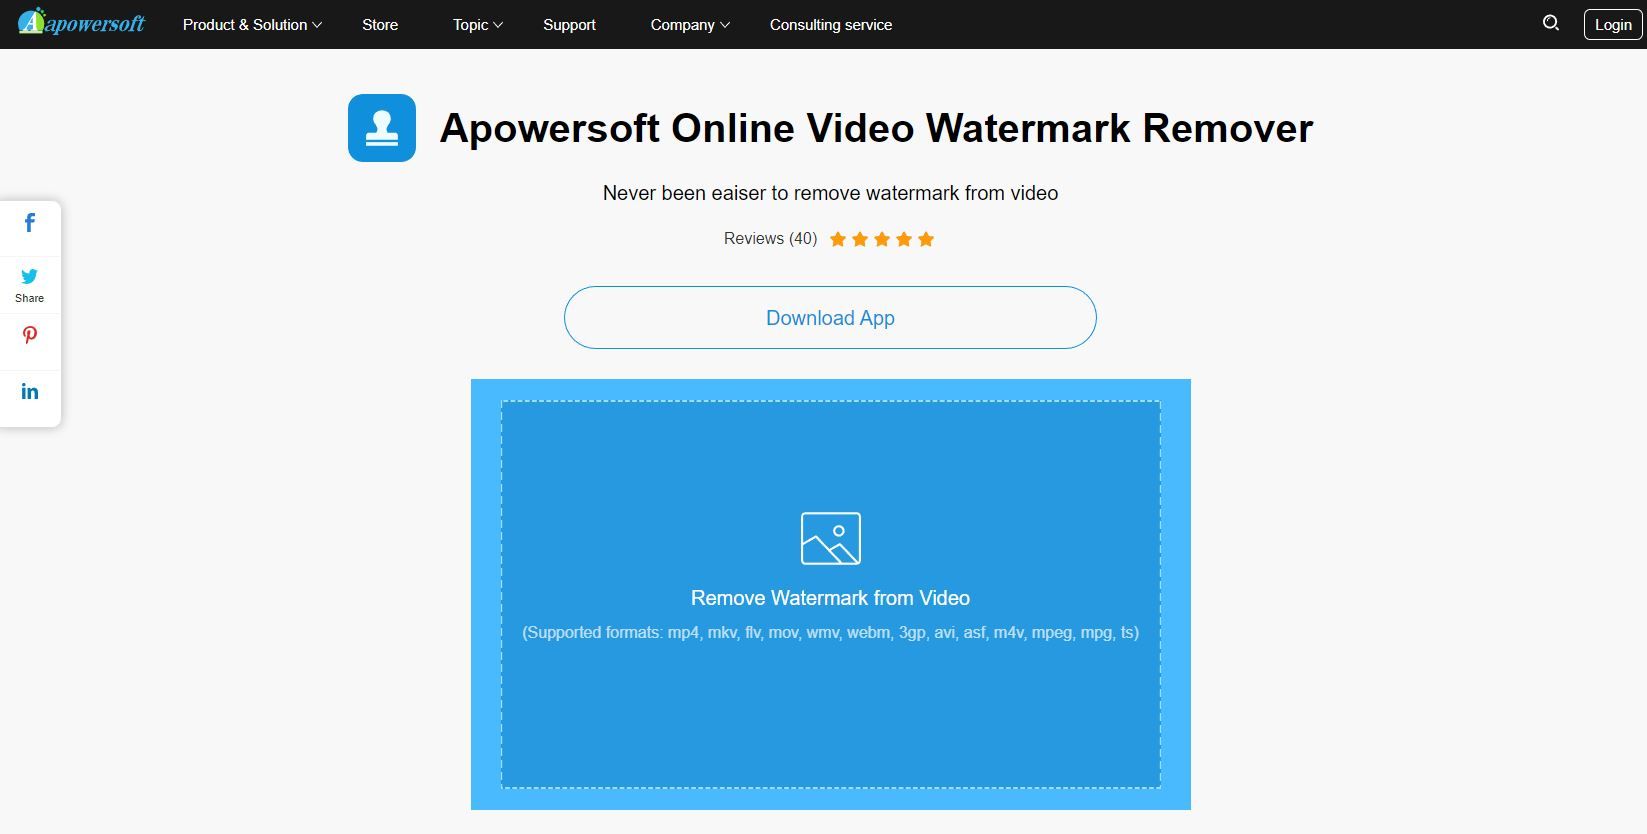 A Screenshot of Apowersoft's Online Video Watermark Remover Landing Page